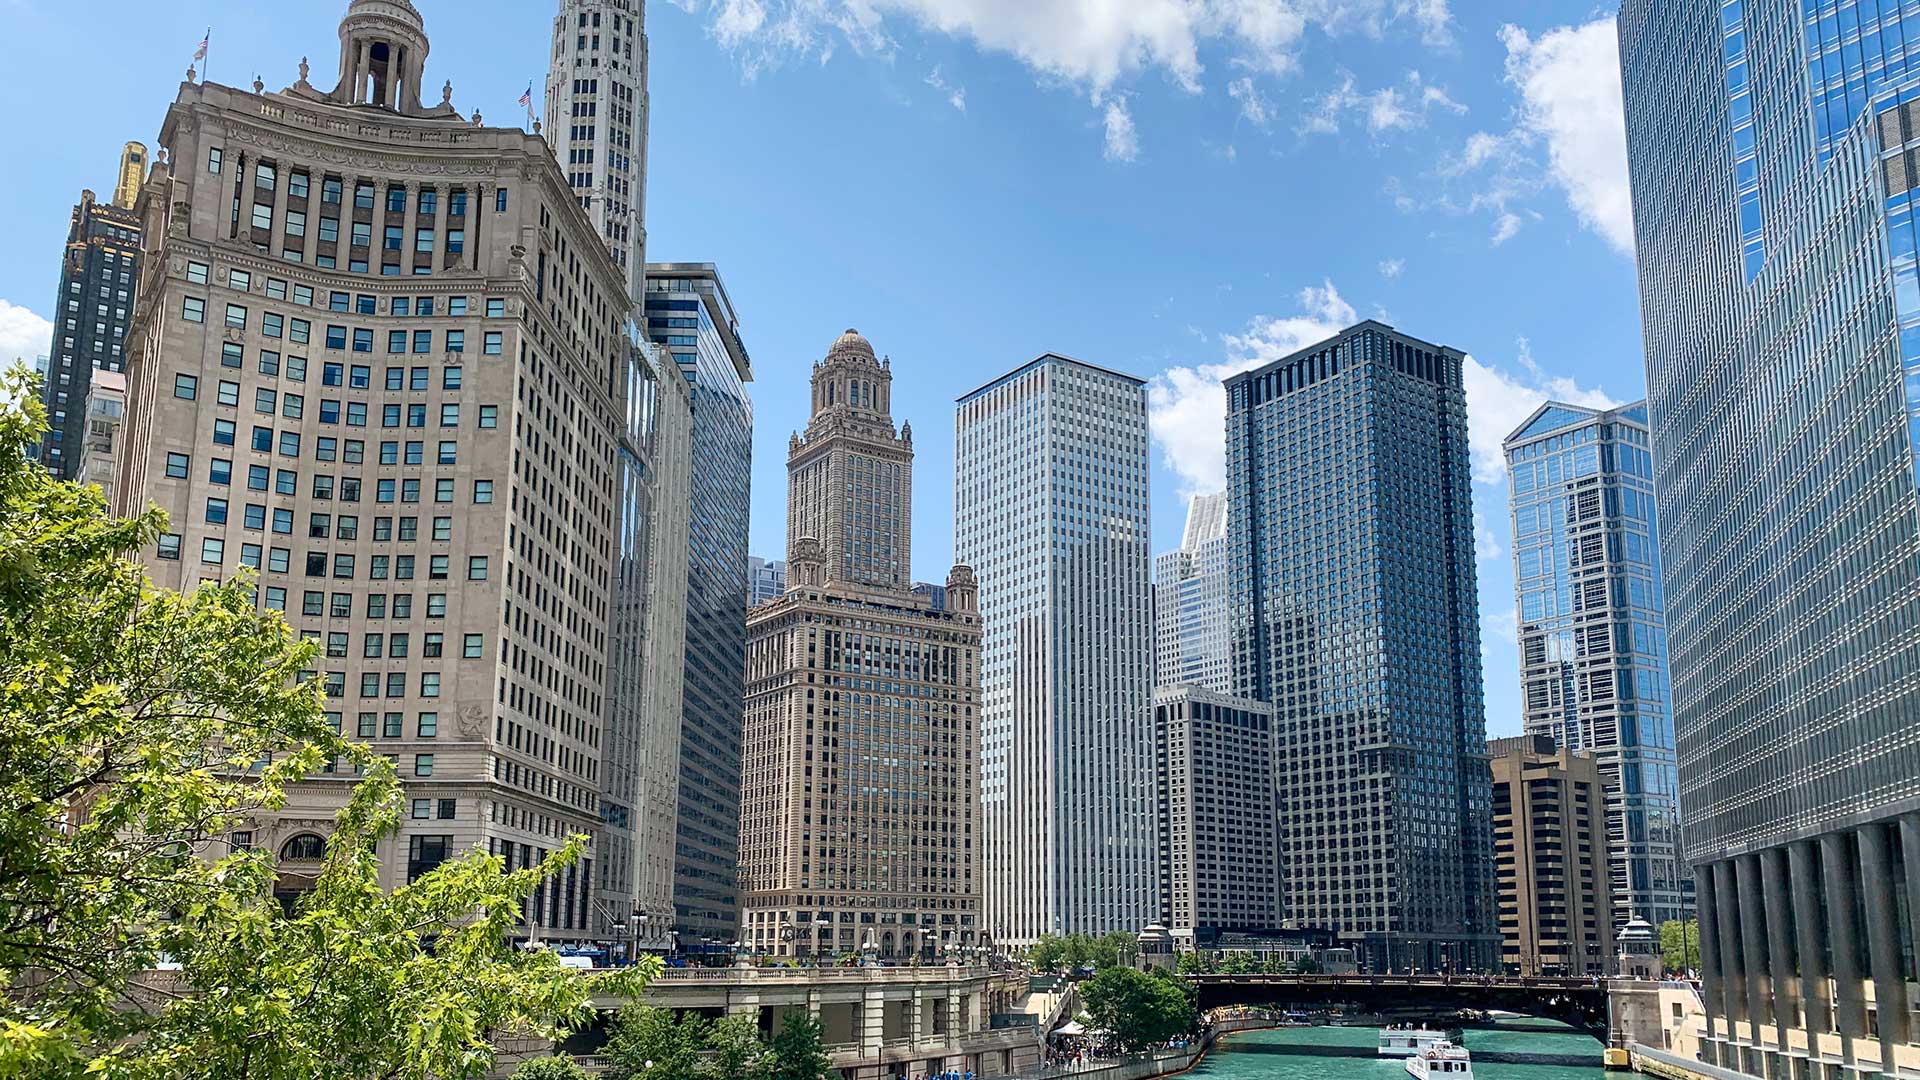 A Chicago cityscape along the Chicago river in summer. The sky is blue with a few clouds.